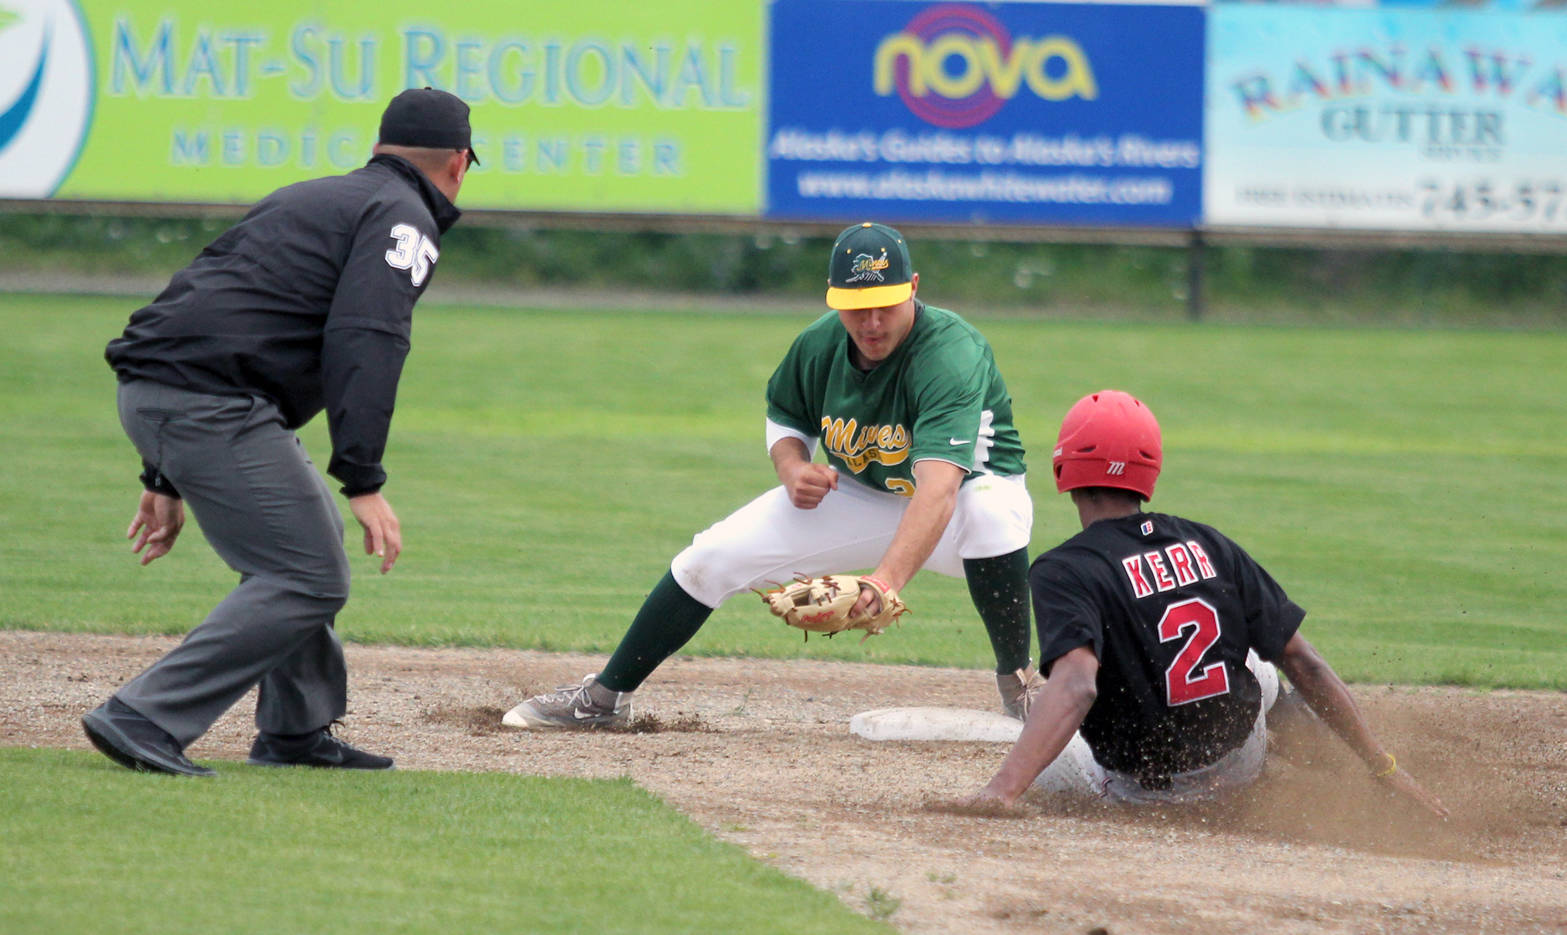 Mat-Su infielder Rainer Ausmus tags Raymond Kerr of the Peninsula Oilers out at second during Ma-Su’s 3-0 win over the Oilers on Monday, July 24, 2017, at Hermon Brothers Field in Palmer. (Photo by Jeremiah Bartz/Frontiersman)